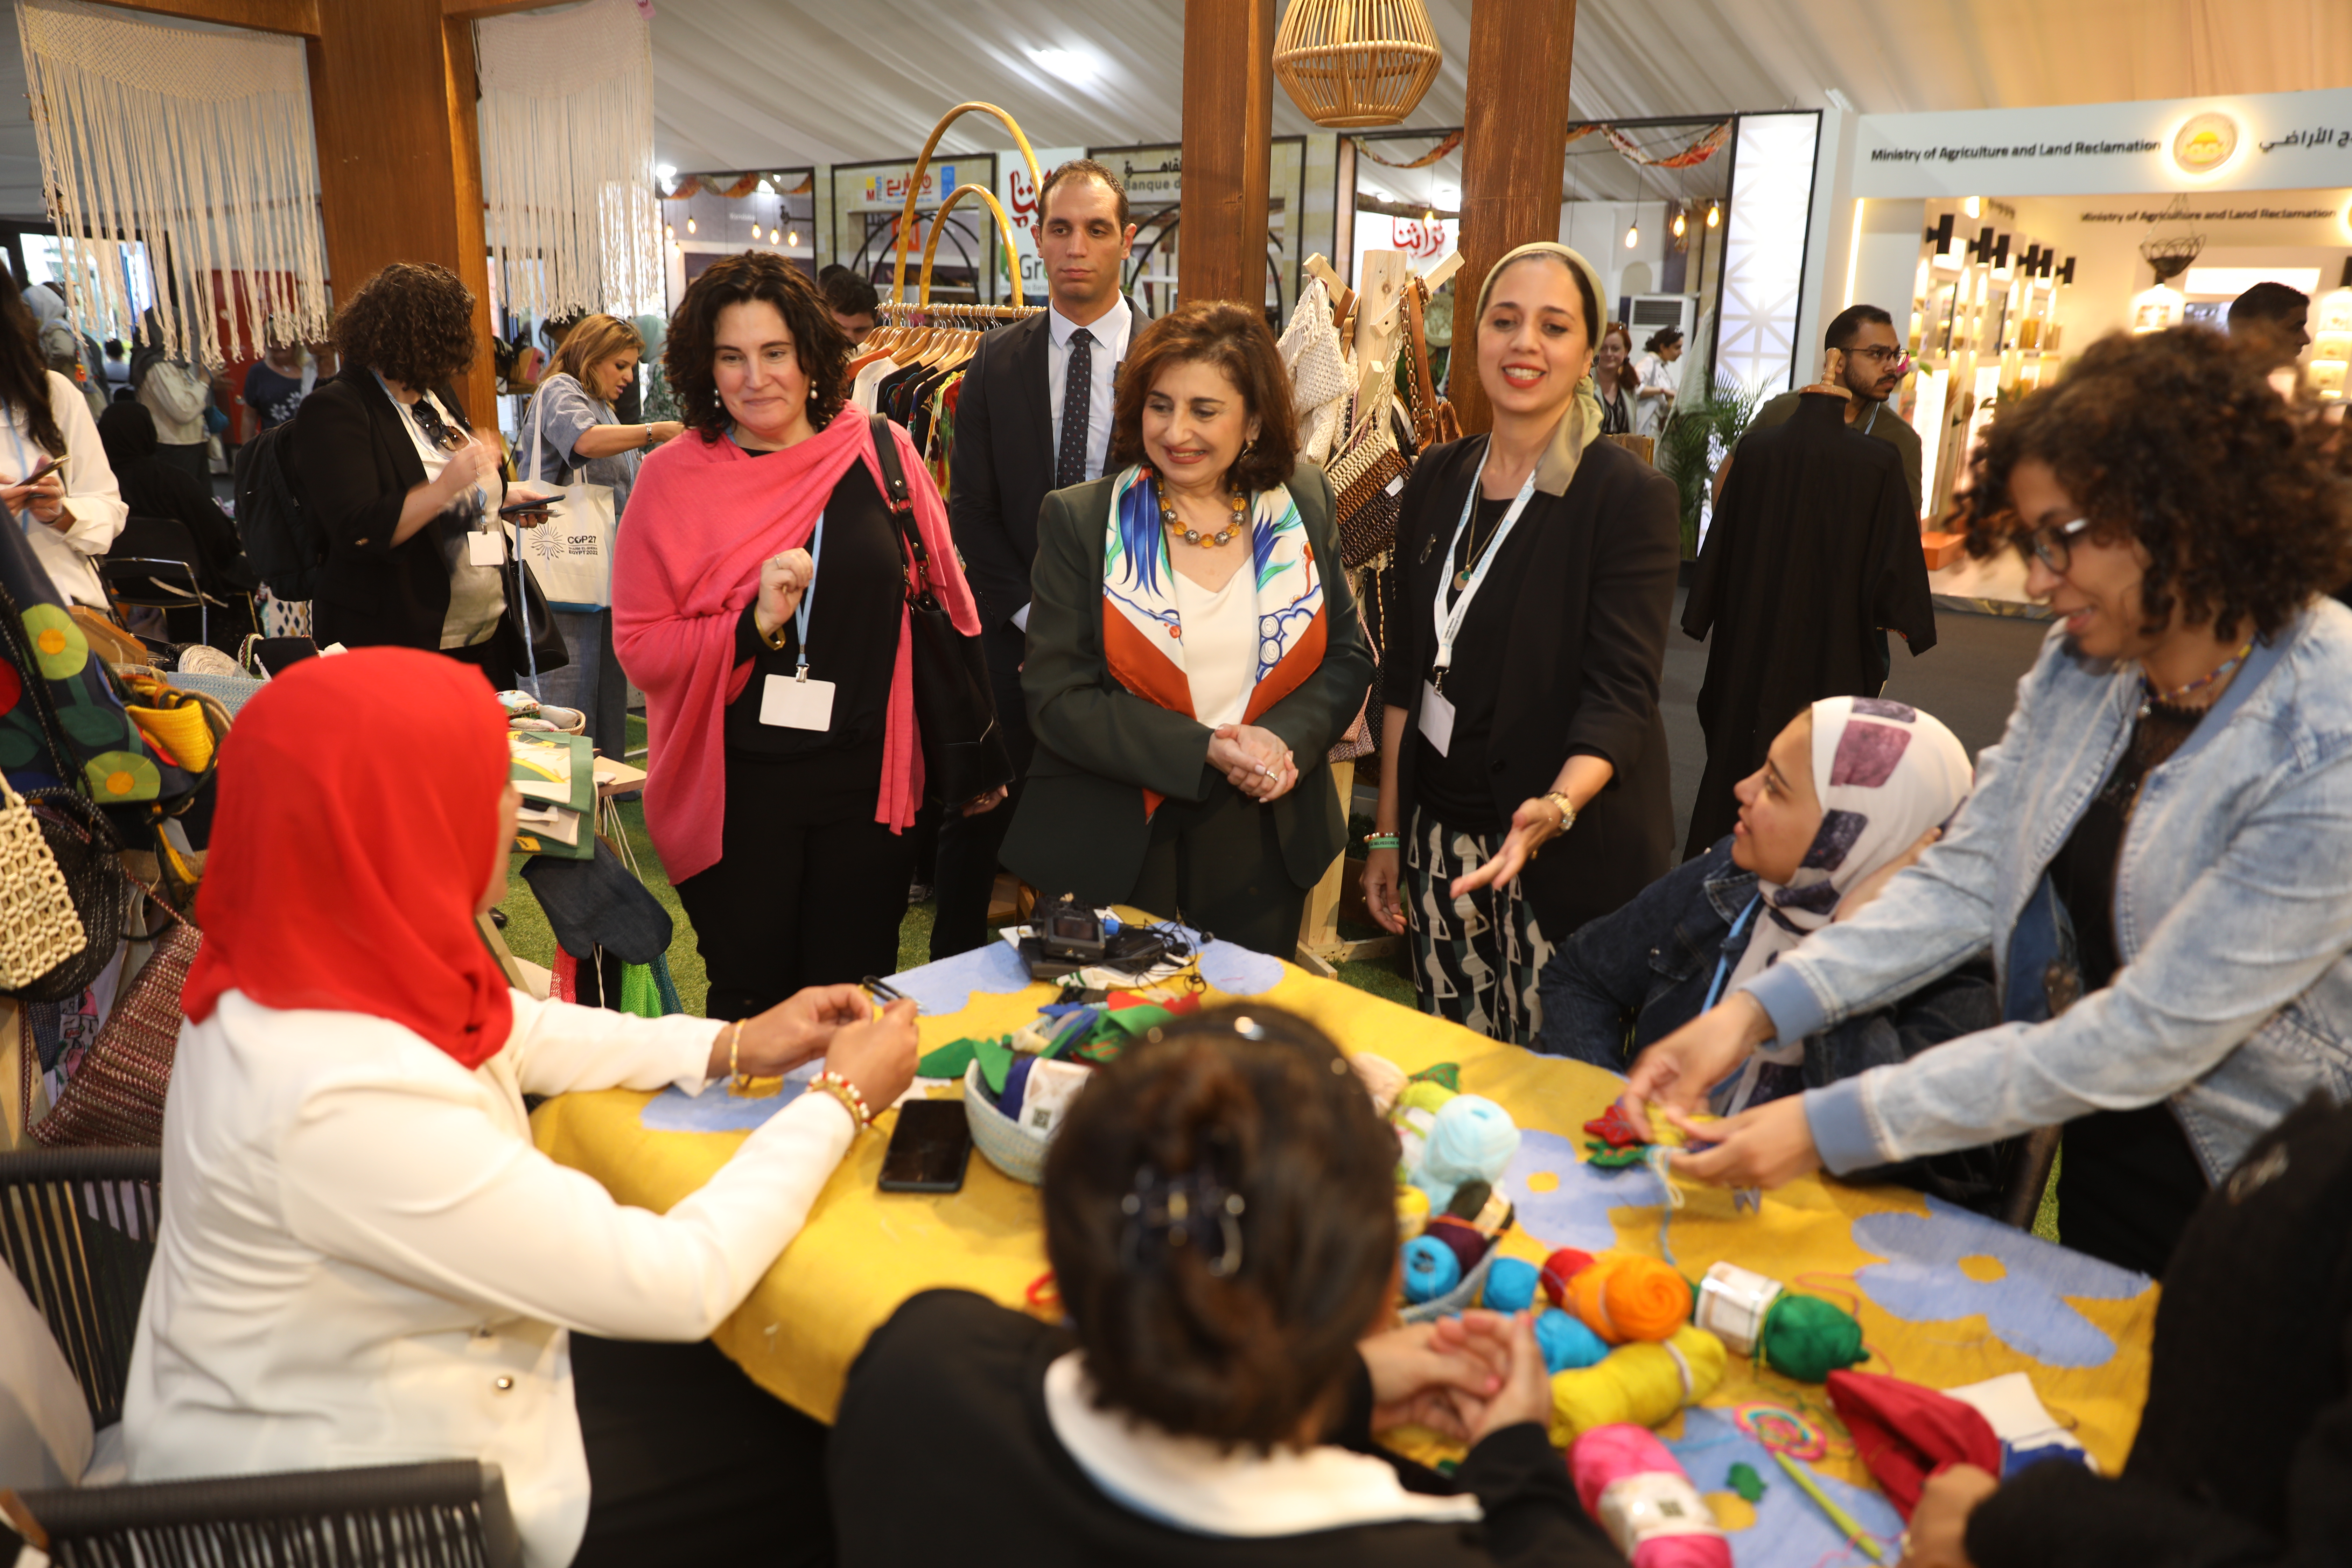 Dr. Sima Bahous visits the Egyptian National Council for Women’s exhibition in the Green Zone at COP27 on 15 November 2022.